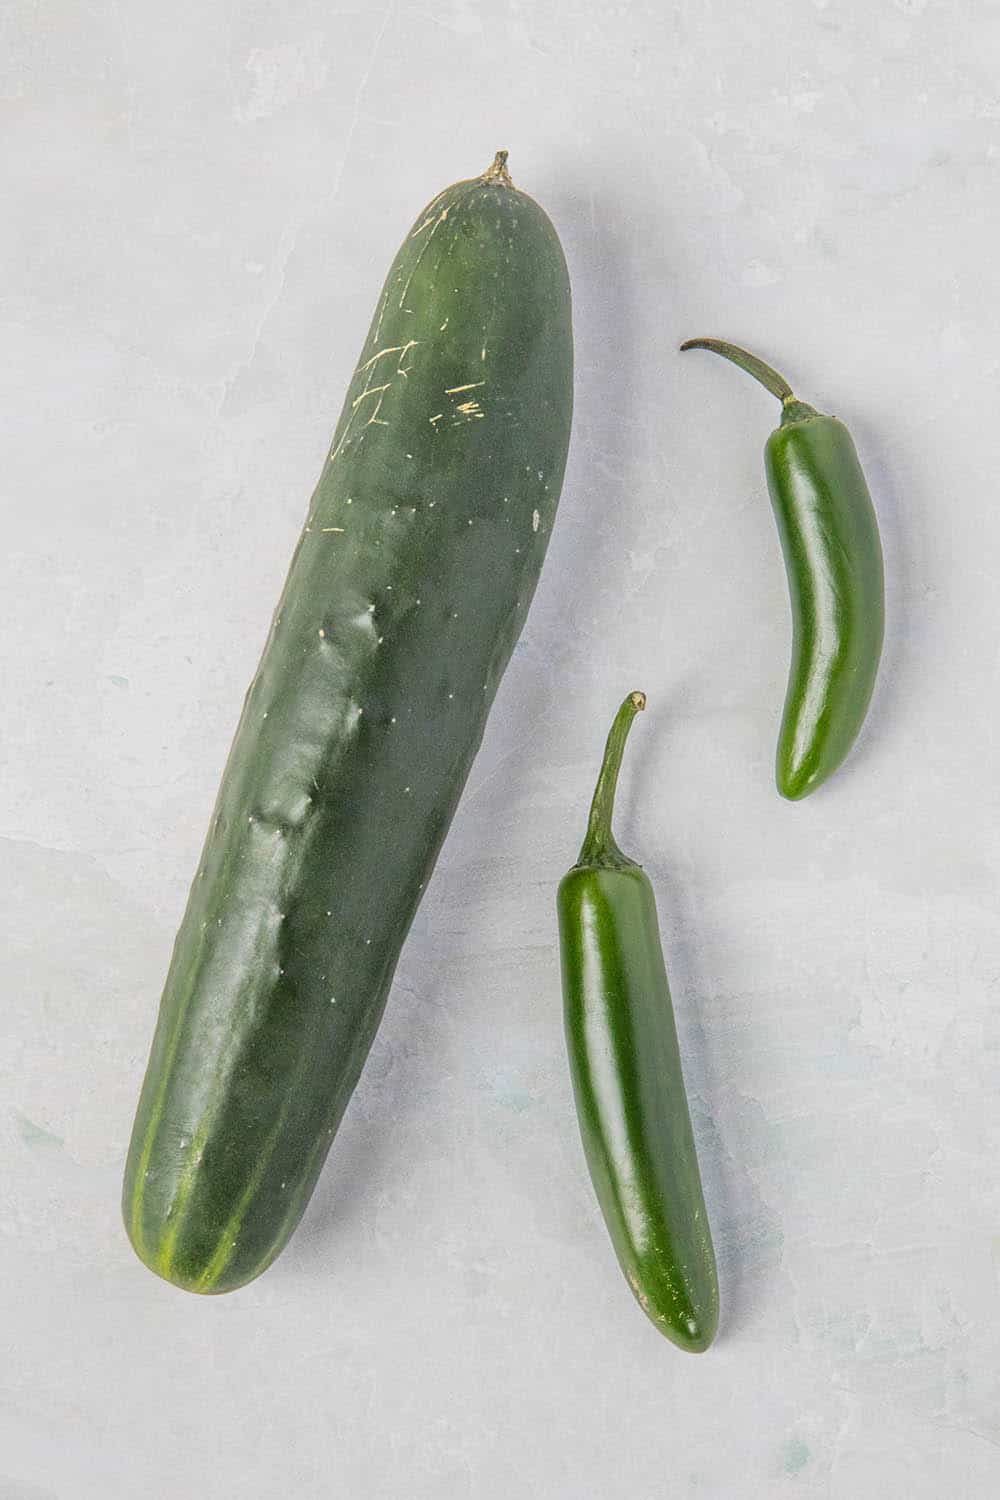 Cucumbers and serrano peppers.